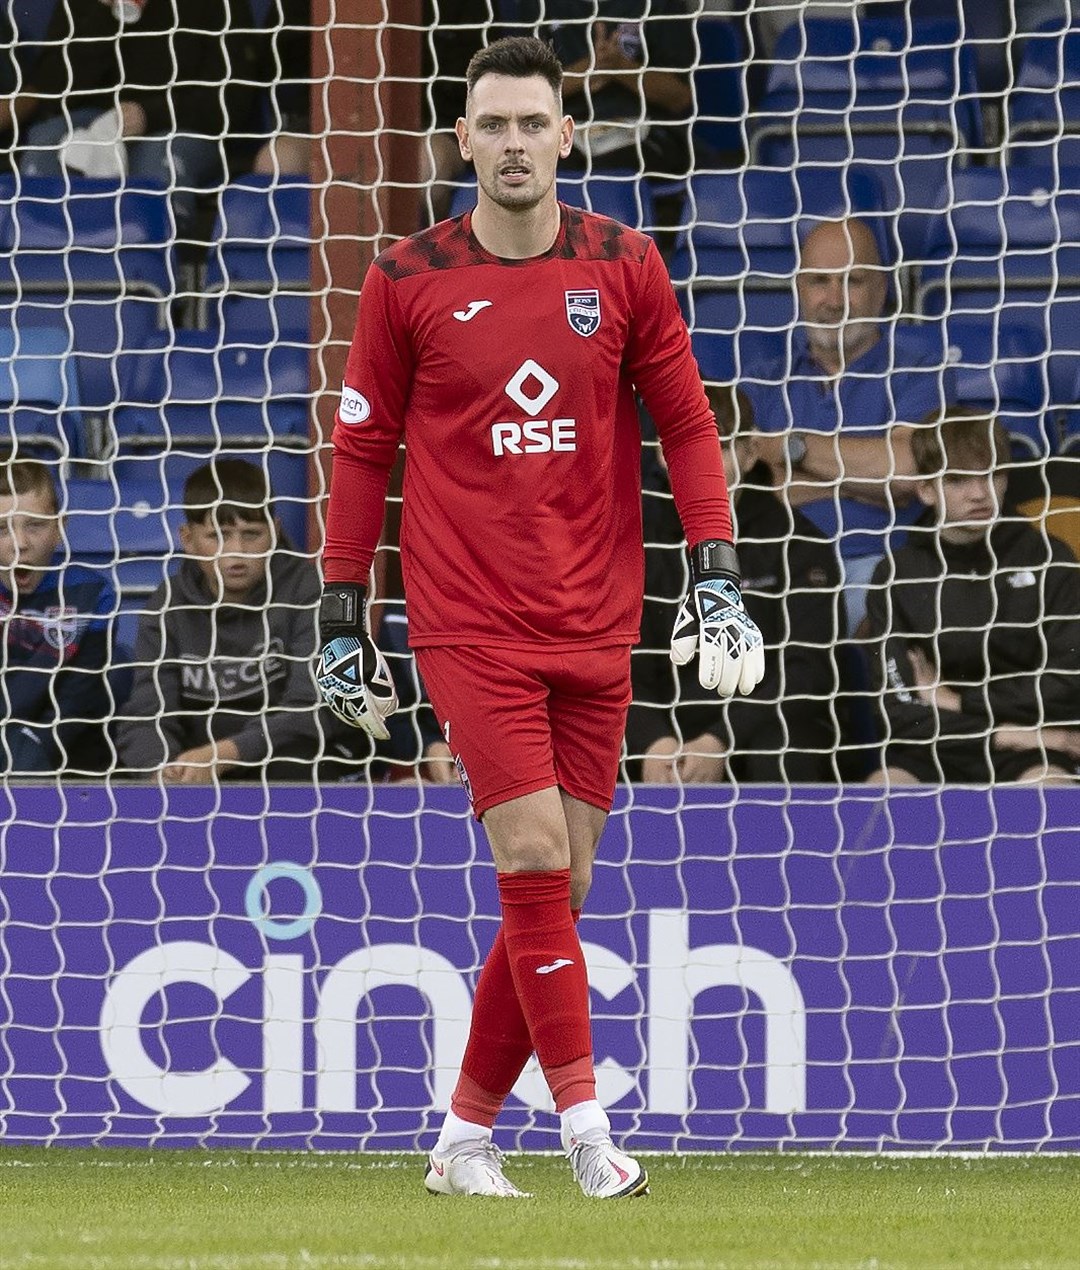 Ross County goalkeeper Ross Laidlaw was heavily worked.